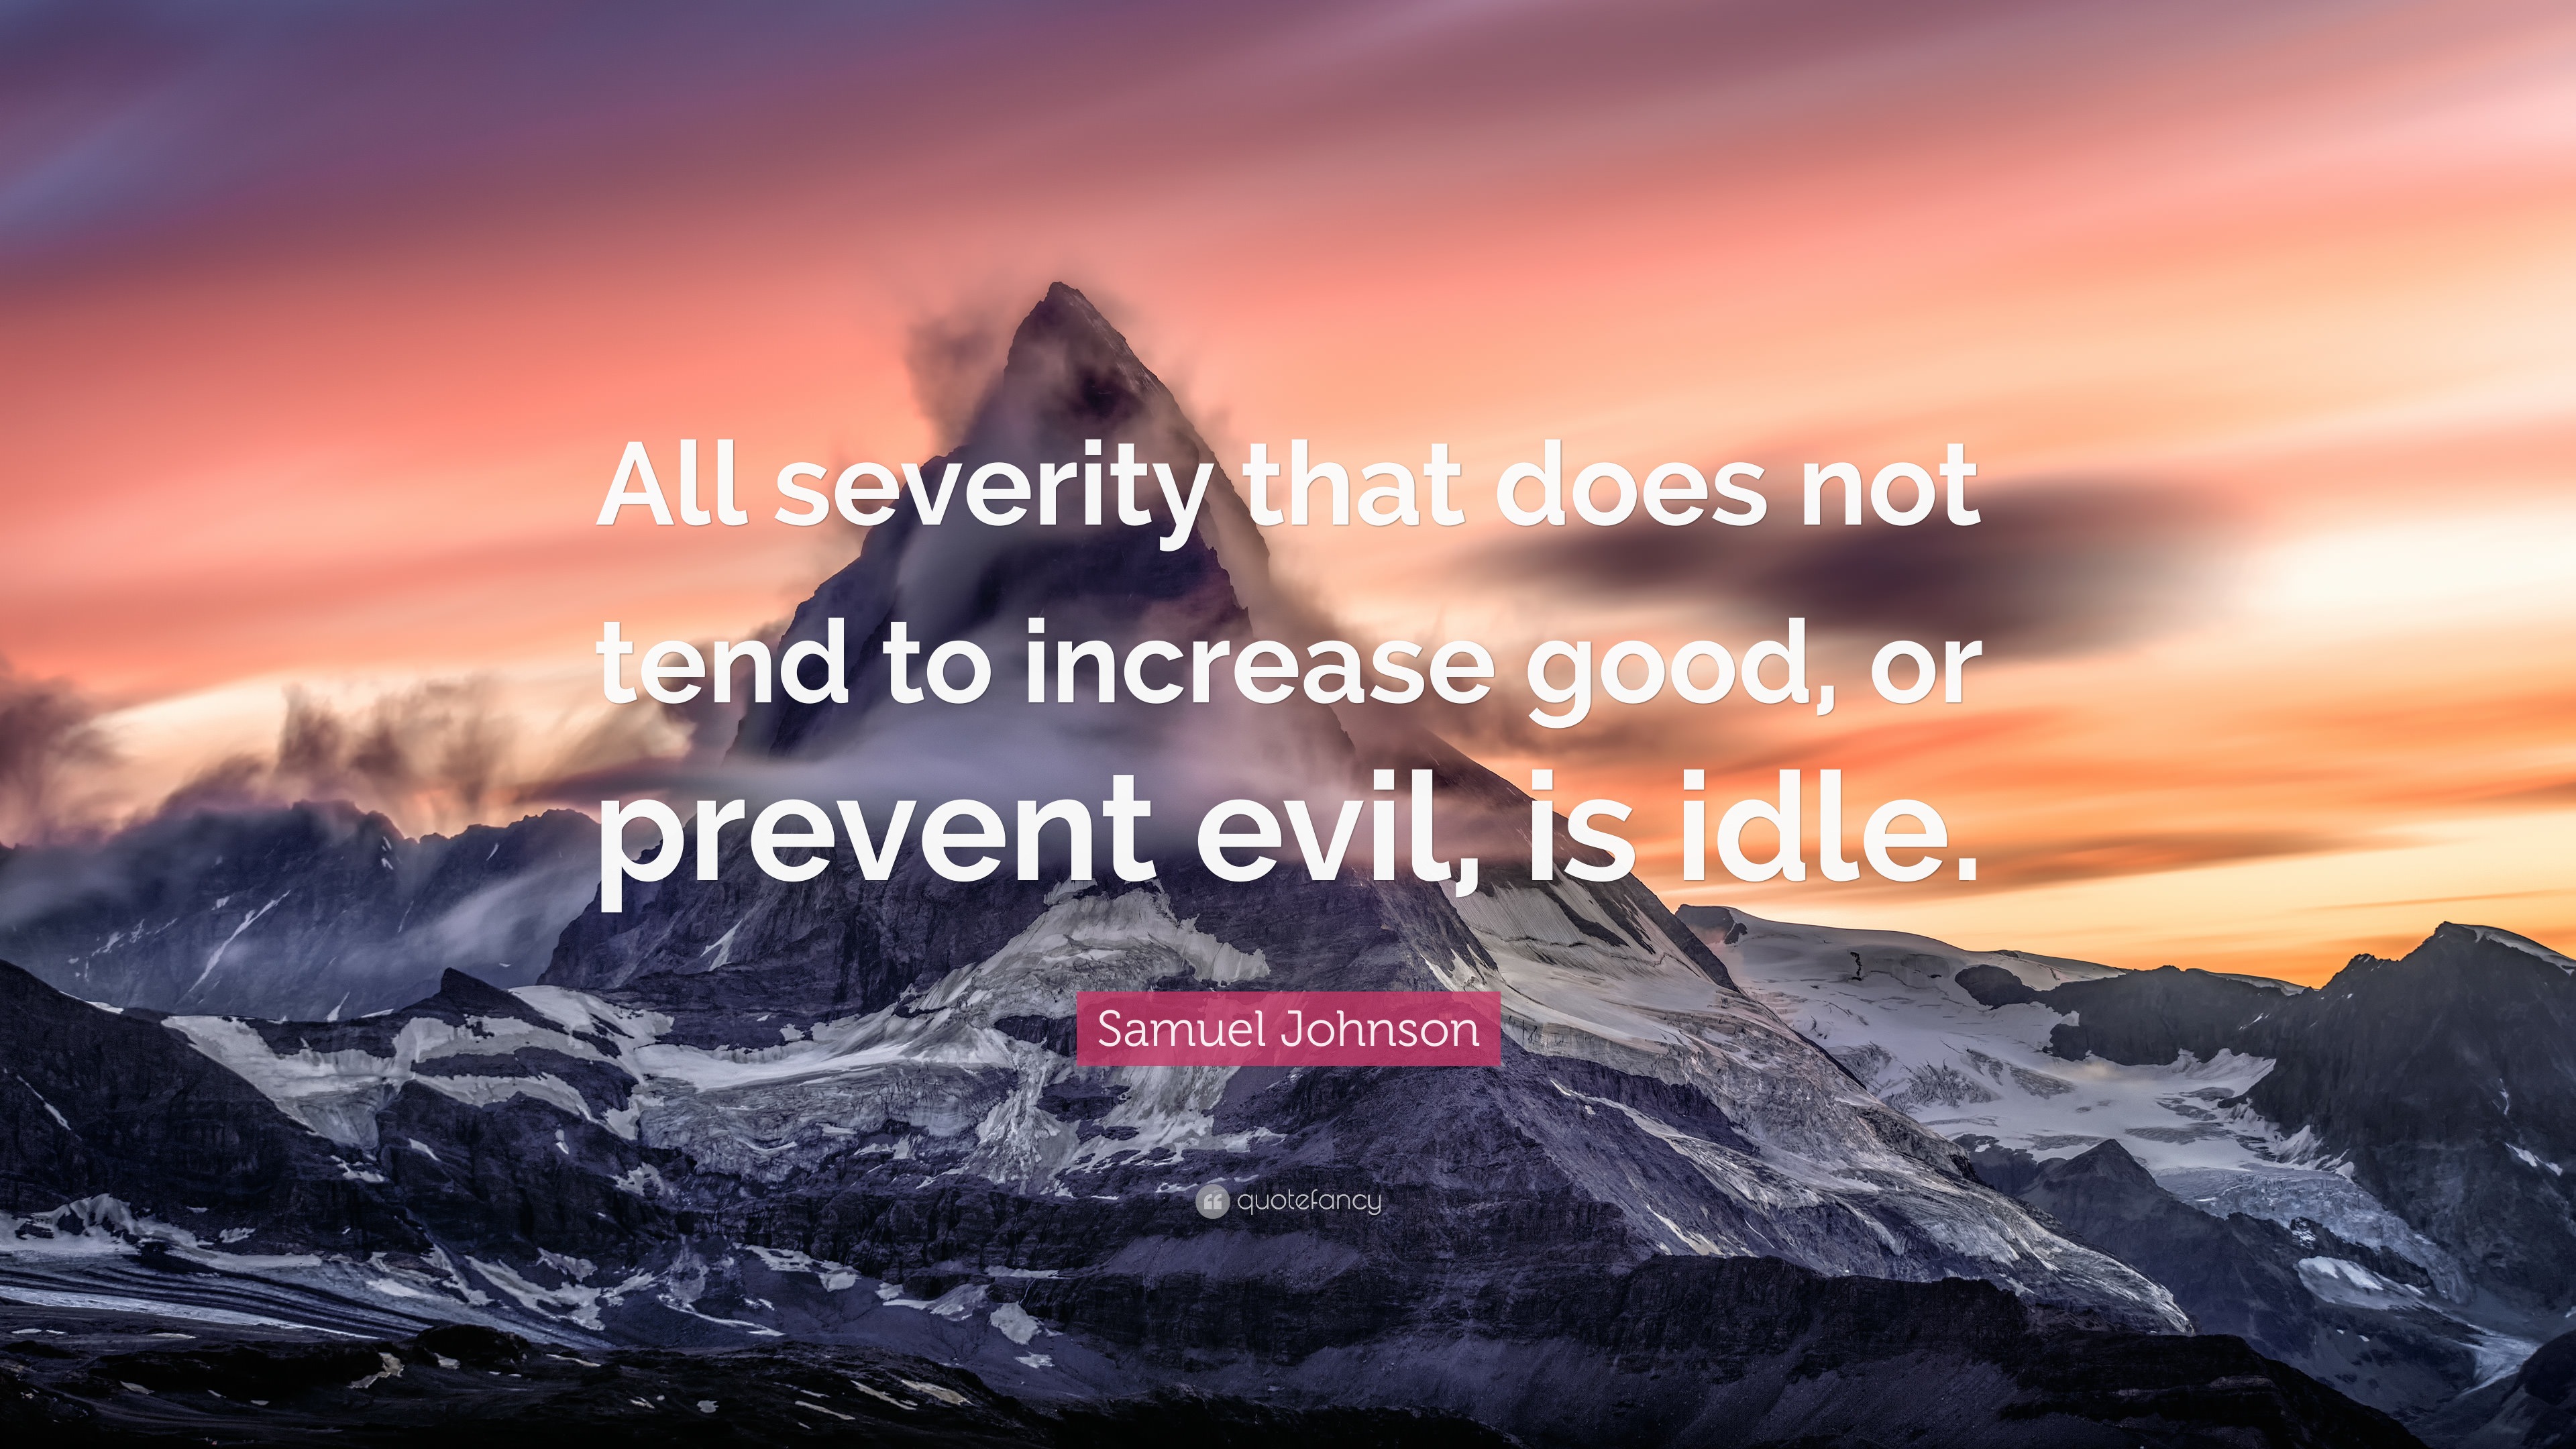 Samuel Johnson Quote: “All severity that does not tend to increase good